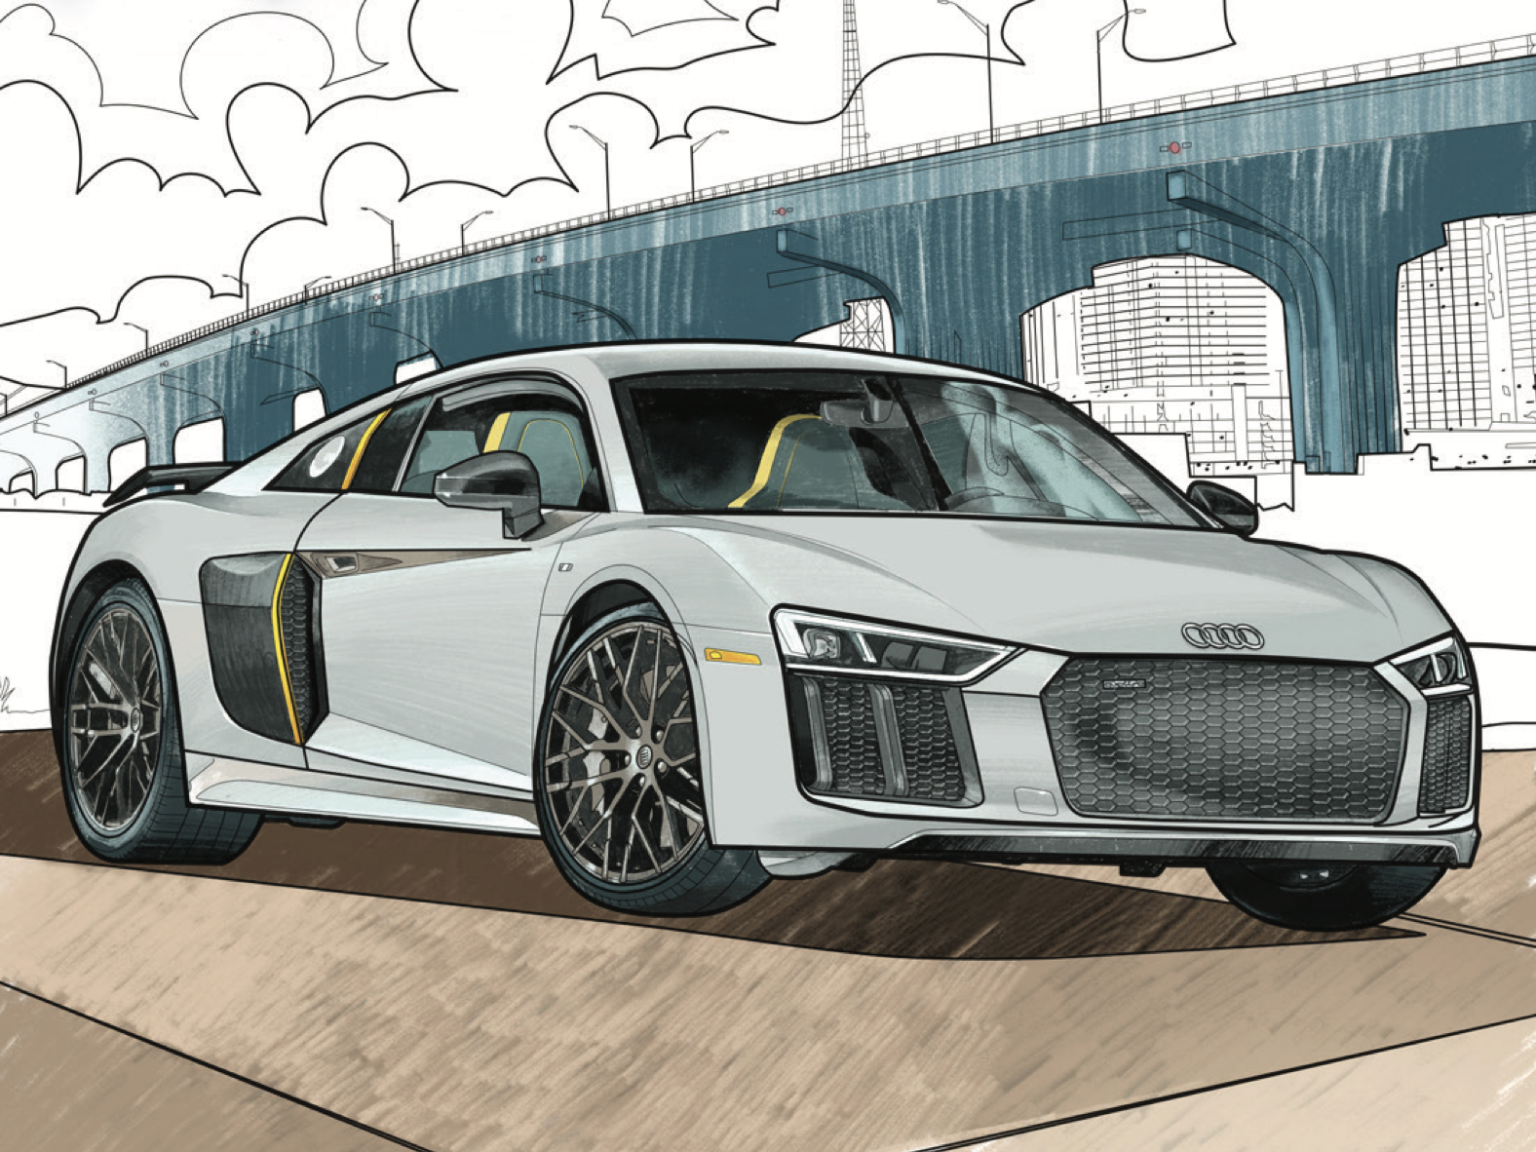 Audi is offering an entire coloring book that you can download and enjoy for free.